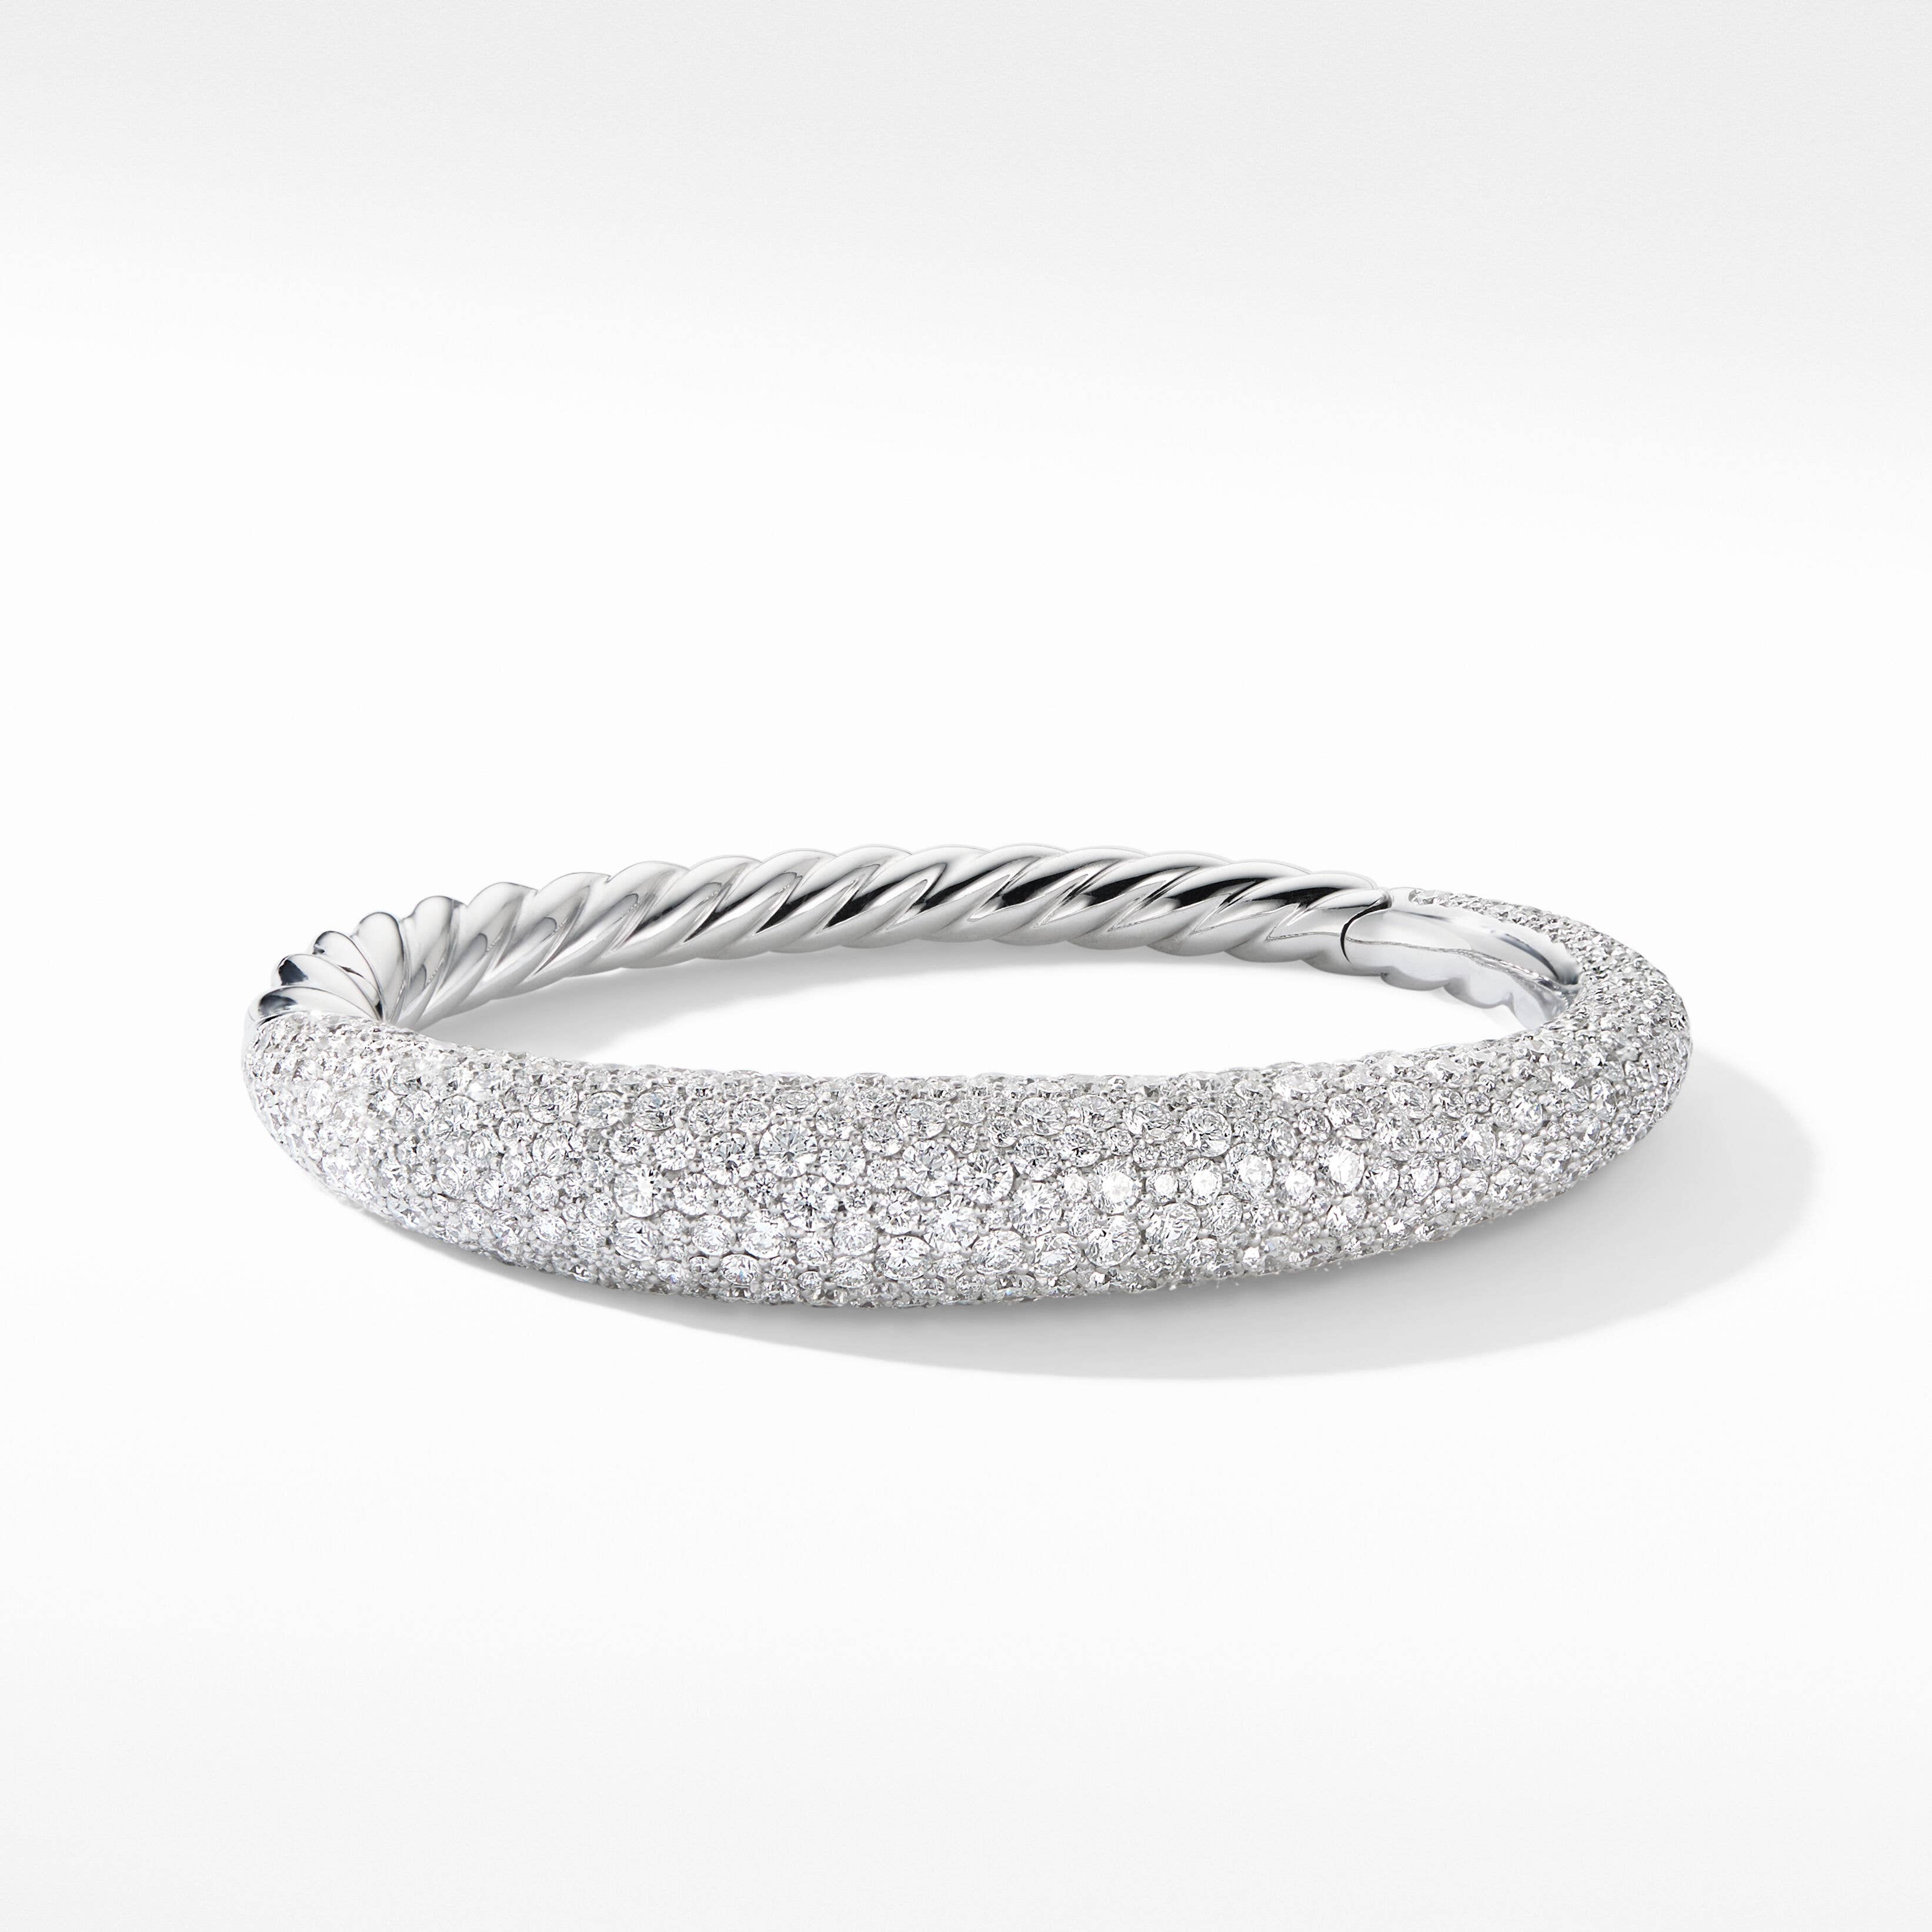 Pure Form® Smooth Bracelet in 18K White Gold with Full Pavé Diamonds